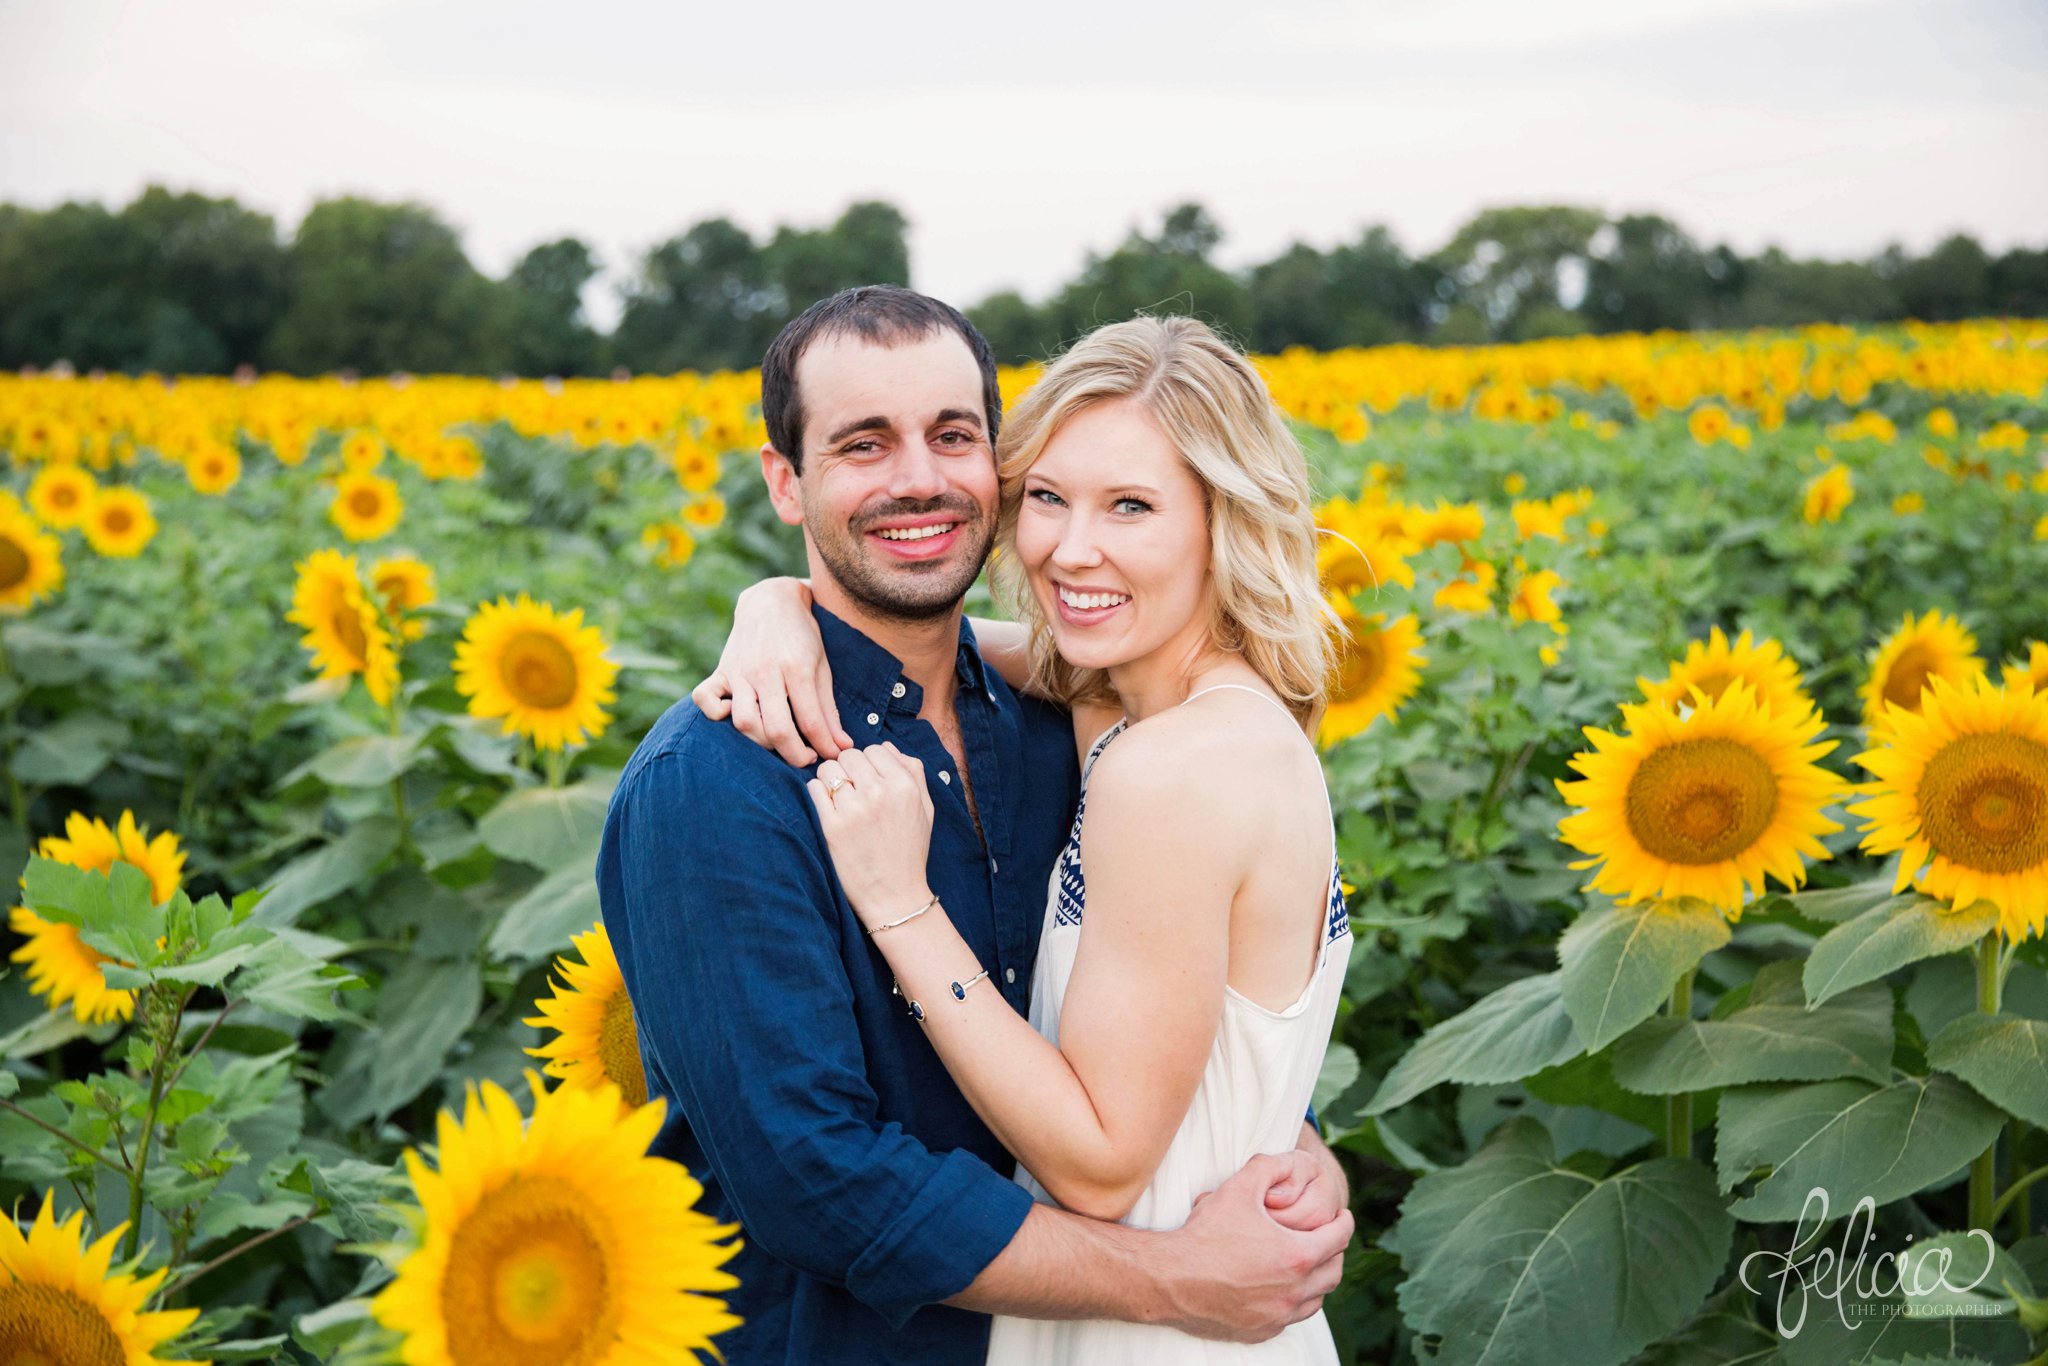 Sunrise Engagement Photos | Felicia The Photographer | Sunflower field | looking at camera